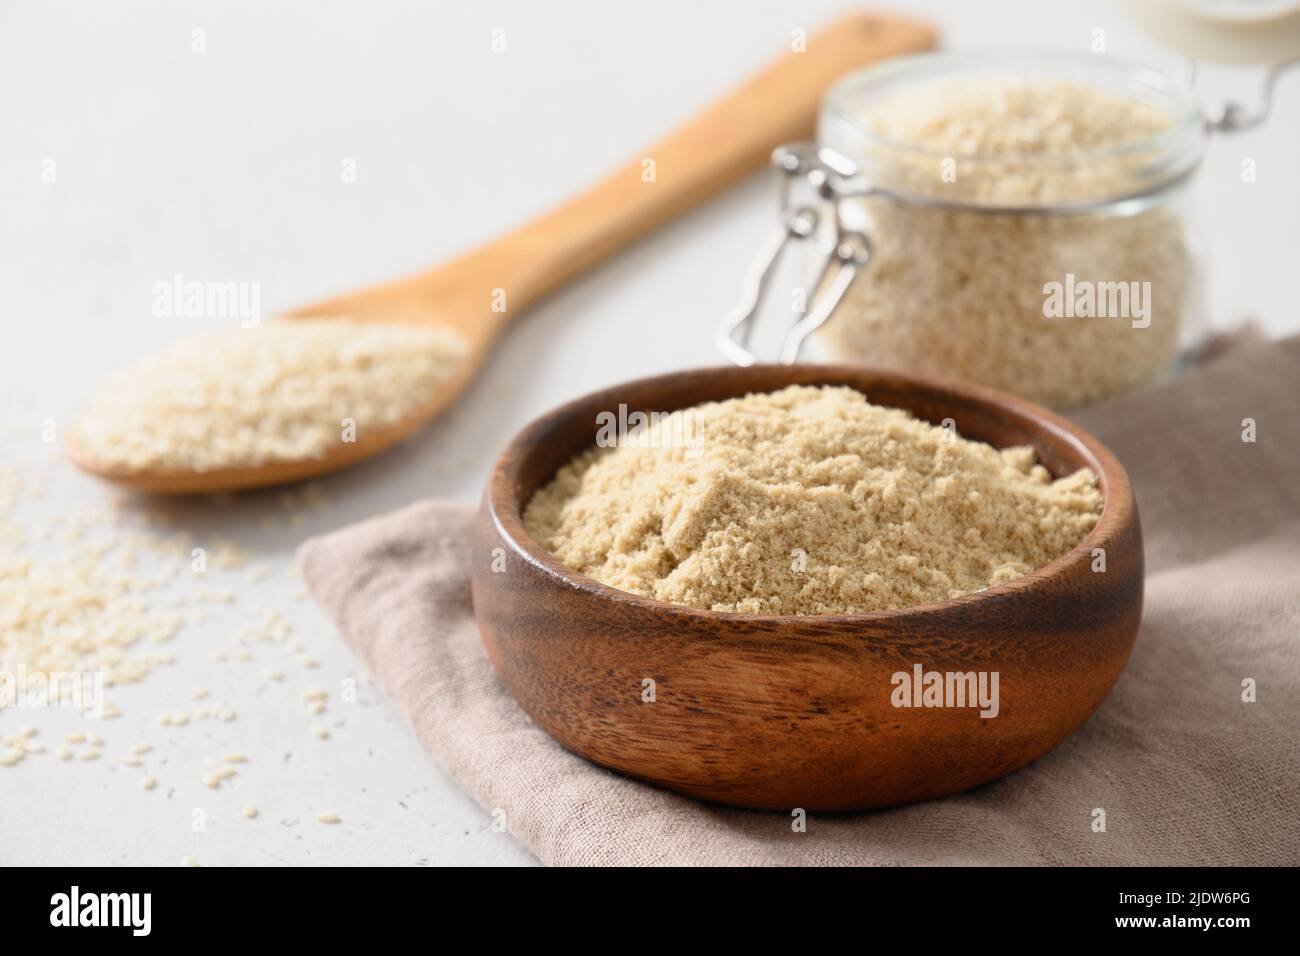 Sesame flour in bowl and sesame seeds in spoon. Stock Photo